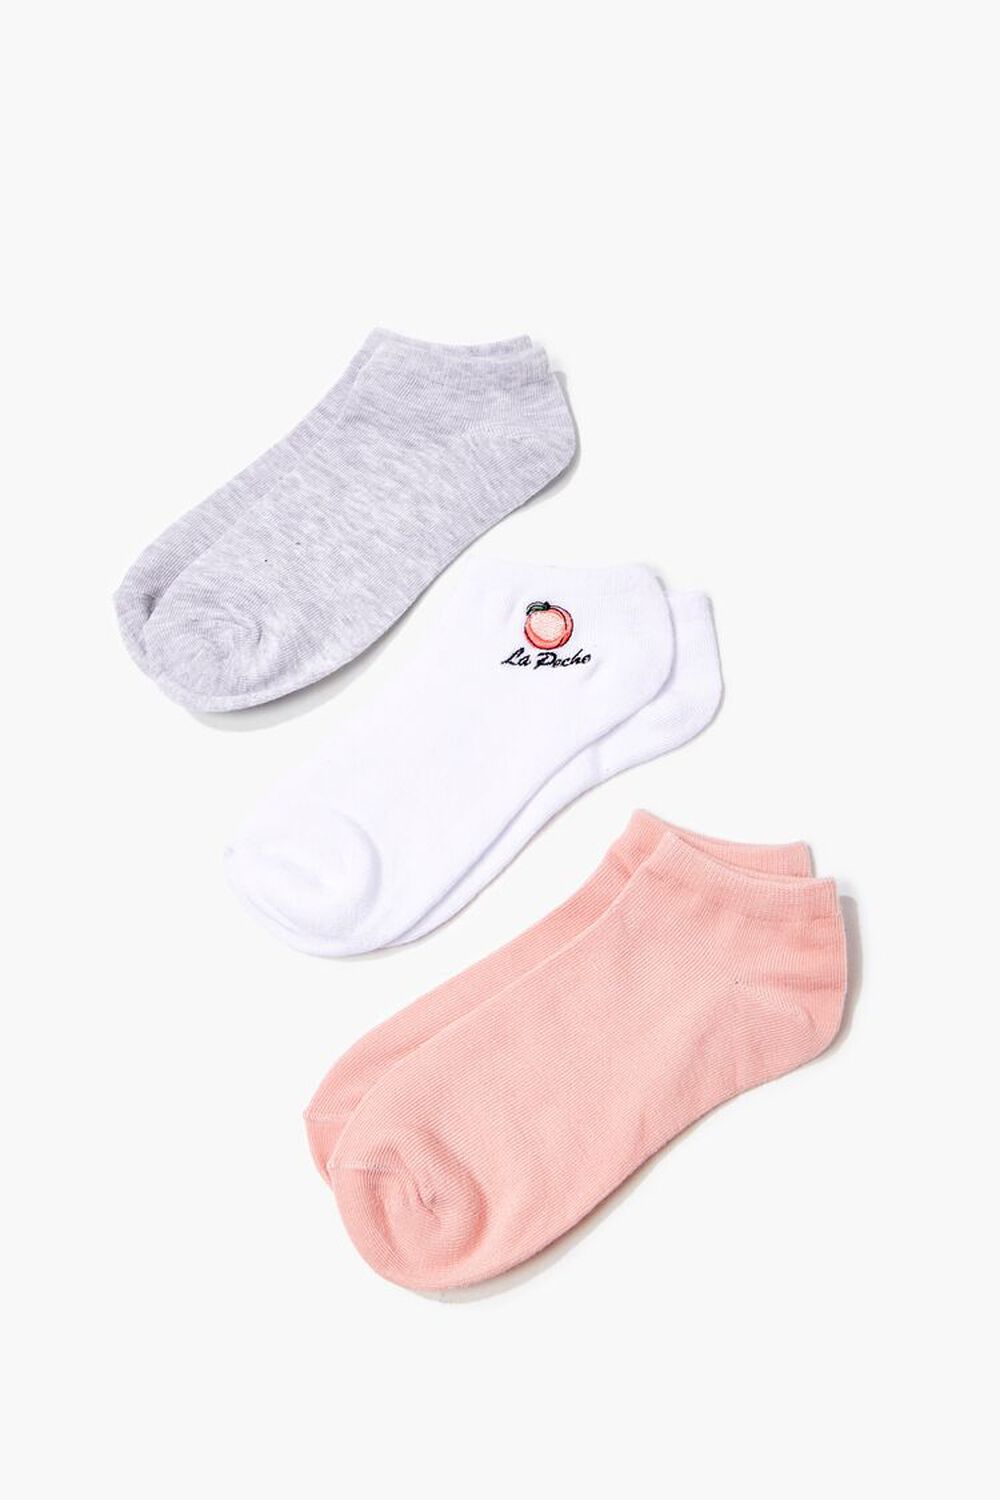 Peach Graphic Ankle Socks - 3 Pack